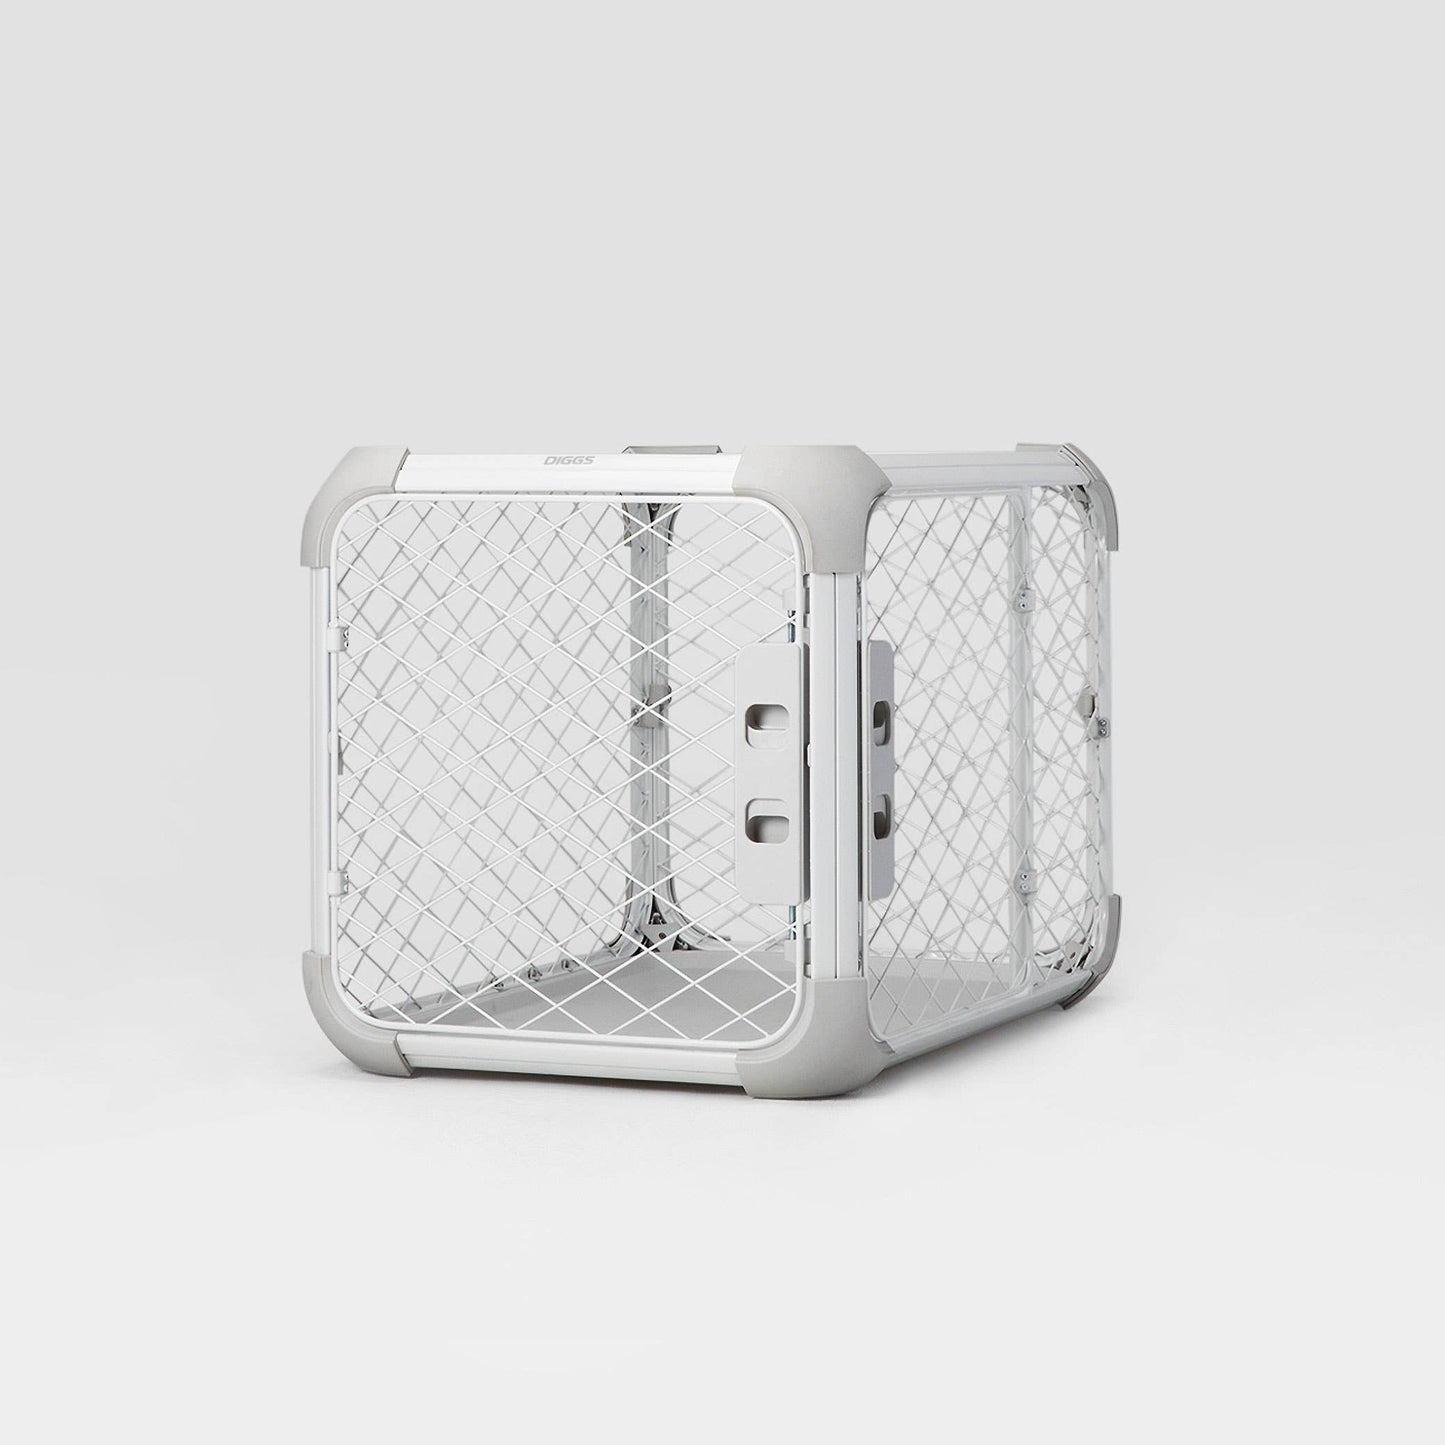 Diggs - Evolv Dog Crate  Image